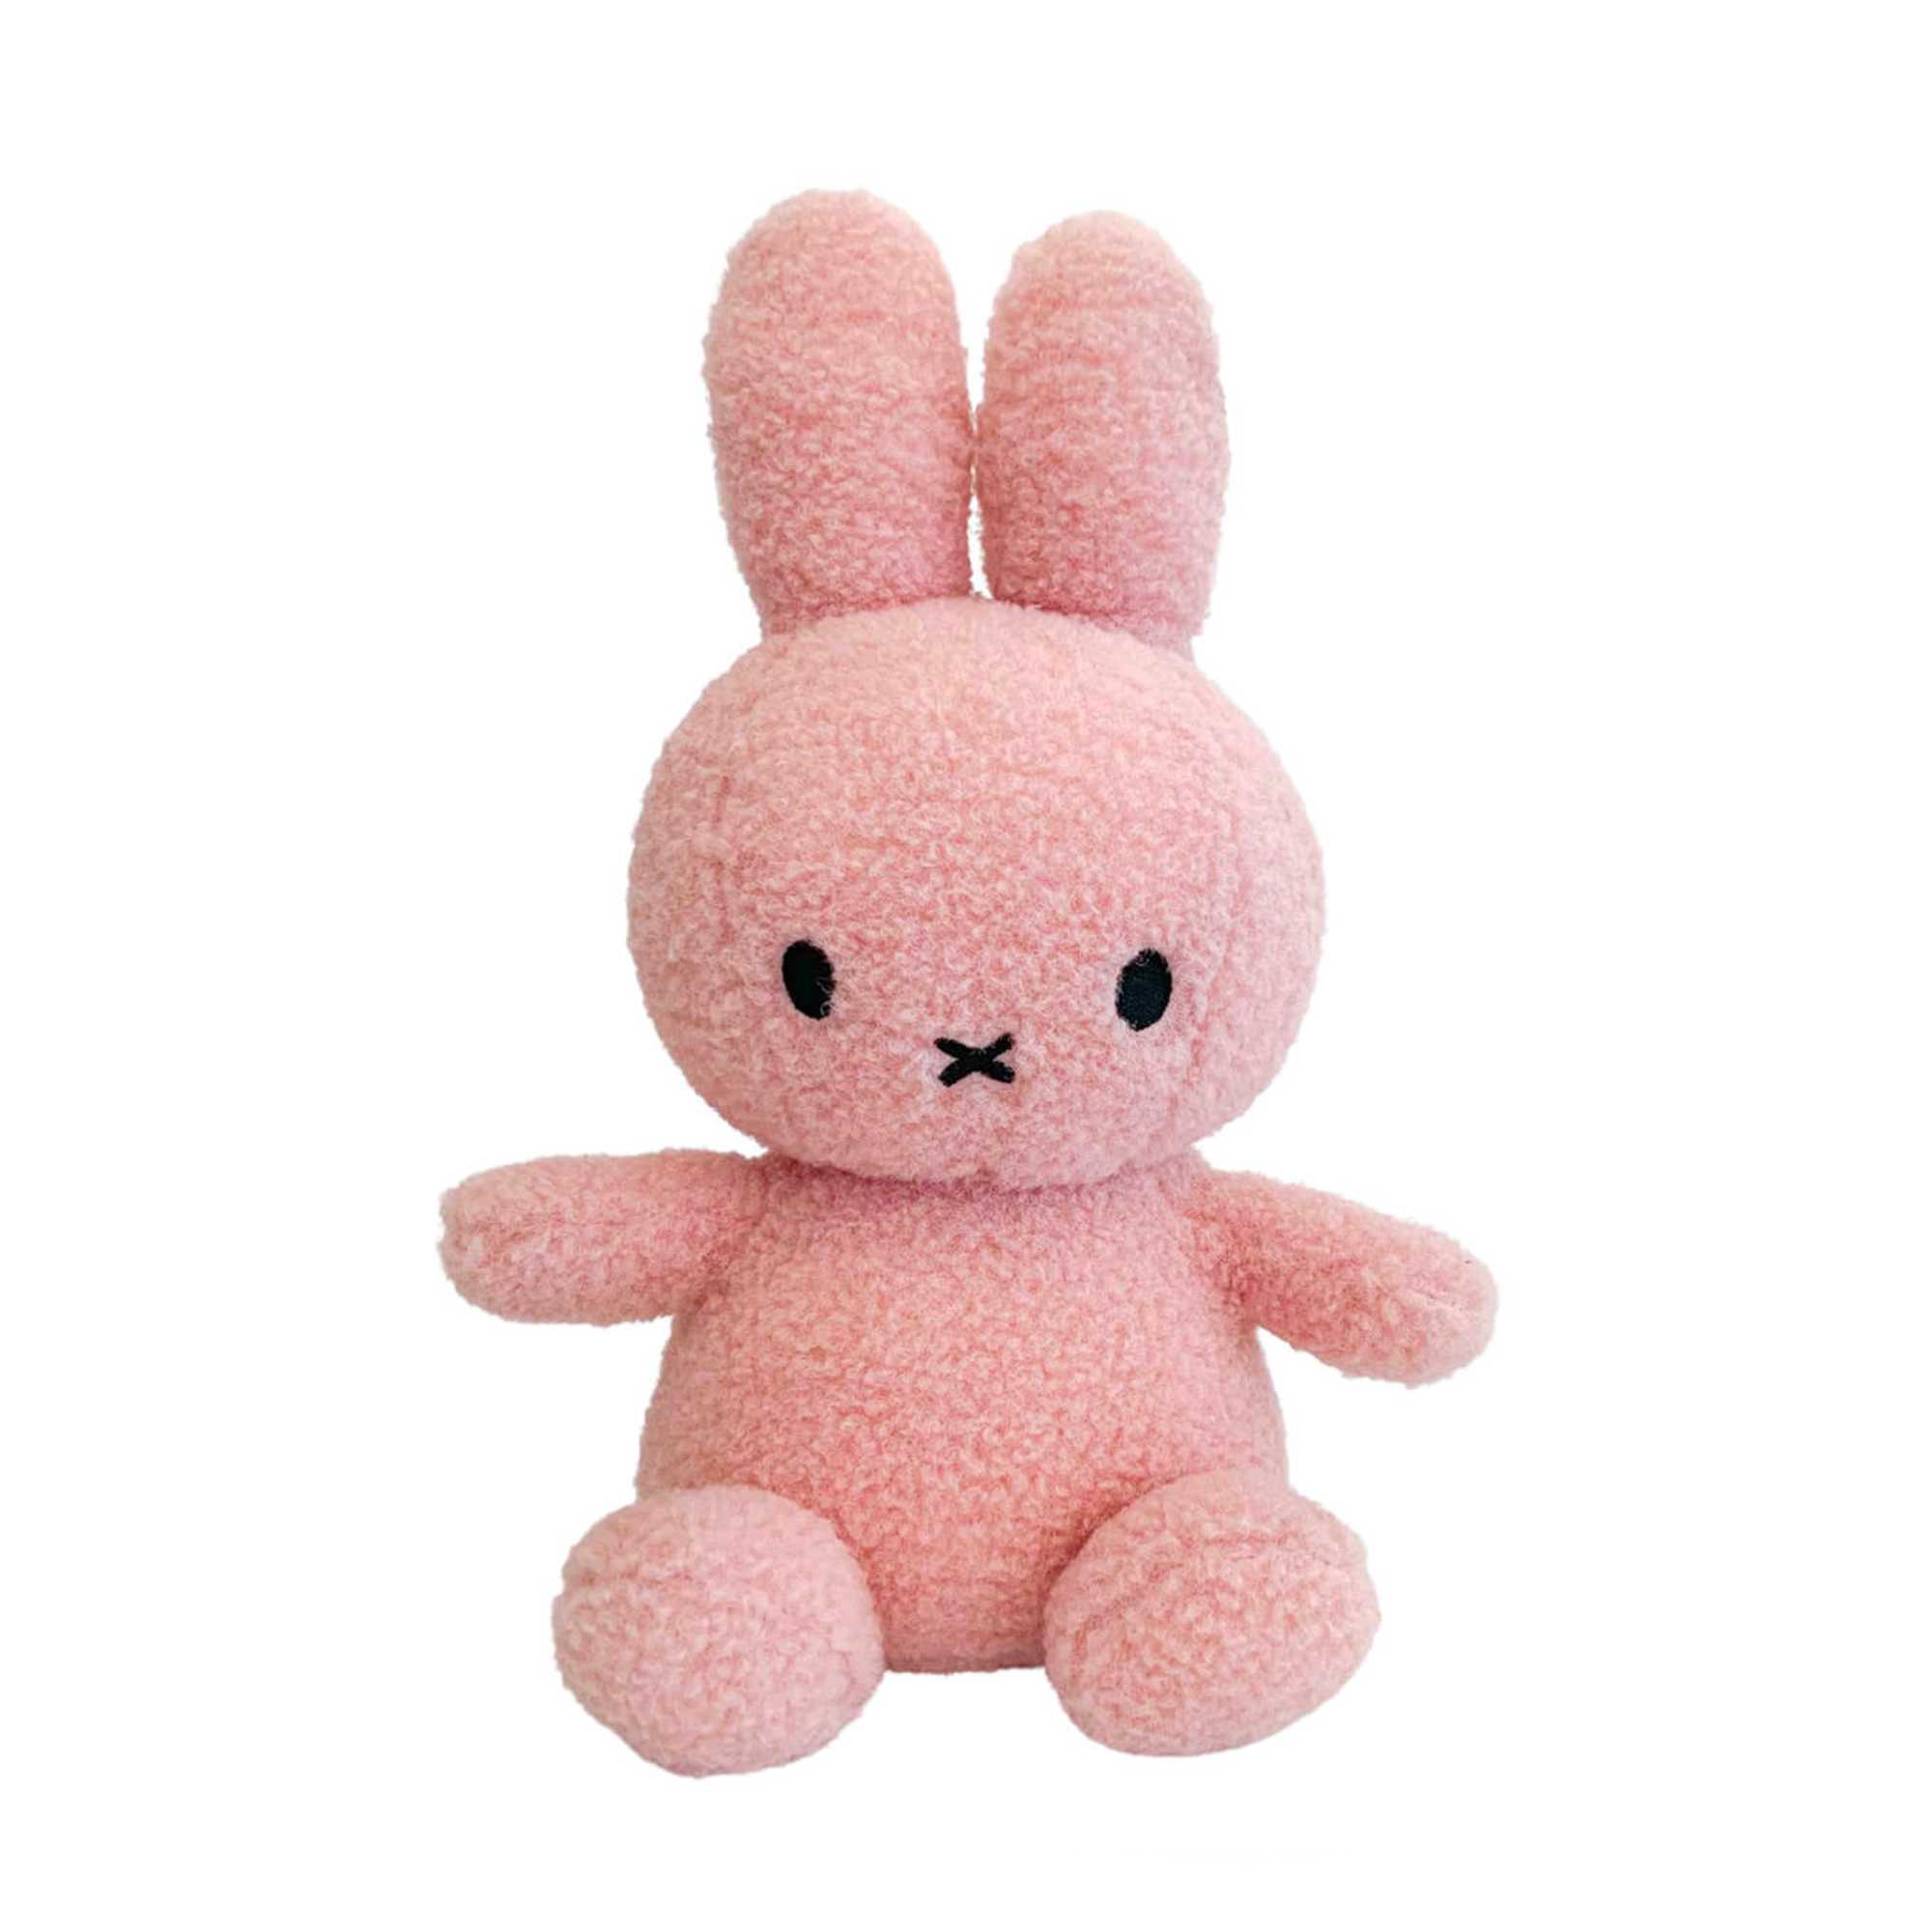 Miffy Sitting Recycle Teddy Soft Toy (33 cm) , Pink